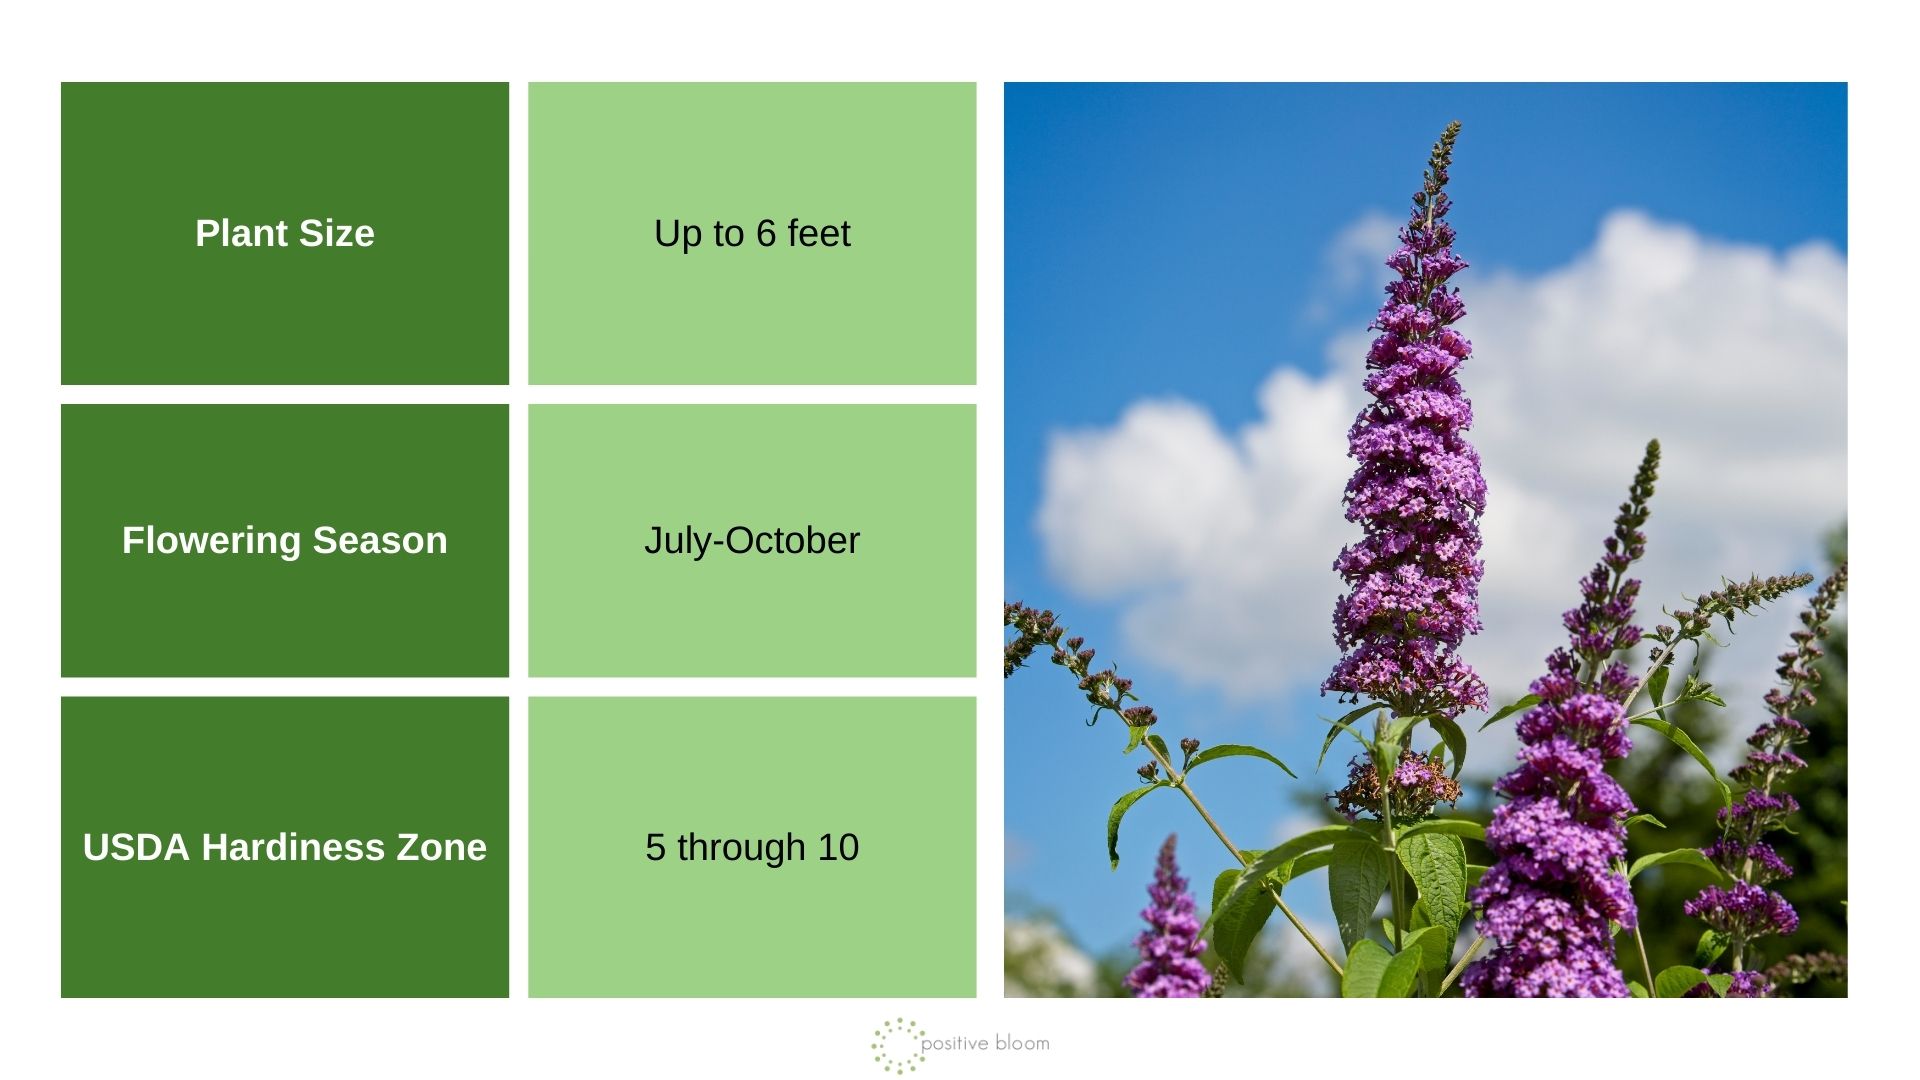 Butterfly Bush info chart and photo